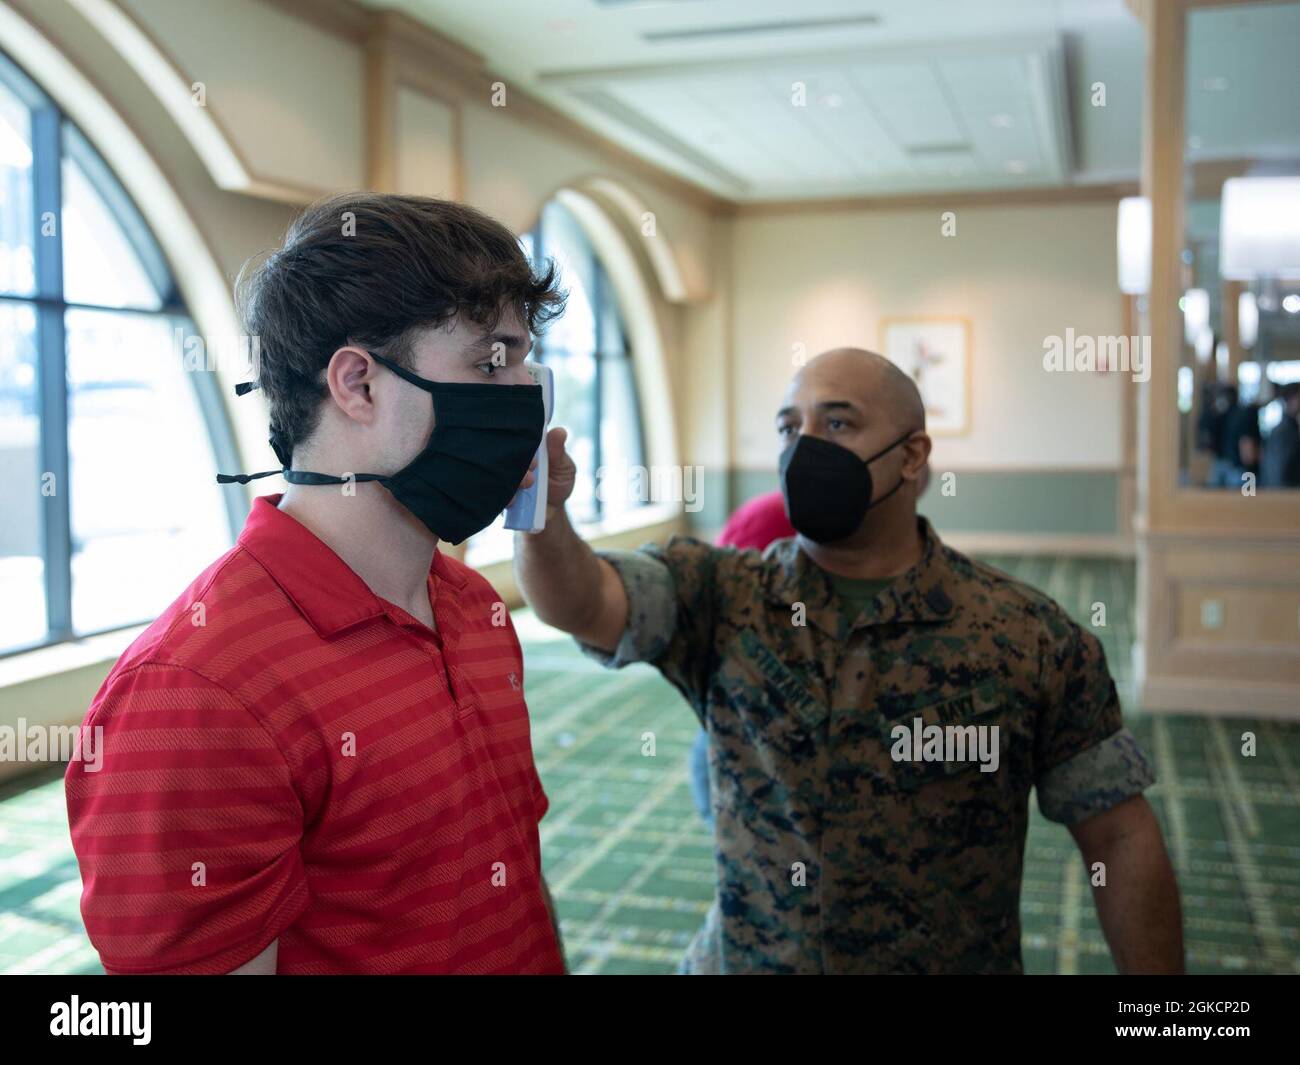 A U.S. Navy Corpsman with Task Force Commitment checks a recruit's temperature at the Hyatt Regency hotel in Jacksonville, Florida, March 15, 2021. Task Force Commitment service members, mostly comprised of Marine Forces Reserve Marines and Sailors, ensure recruits are quarantined at the hotel for two weeks to mitigate the spread of COVID-19 before traveling to Marine Corps Recruit Depot Parris Island to begin recruit training. Stock Photo